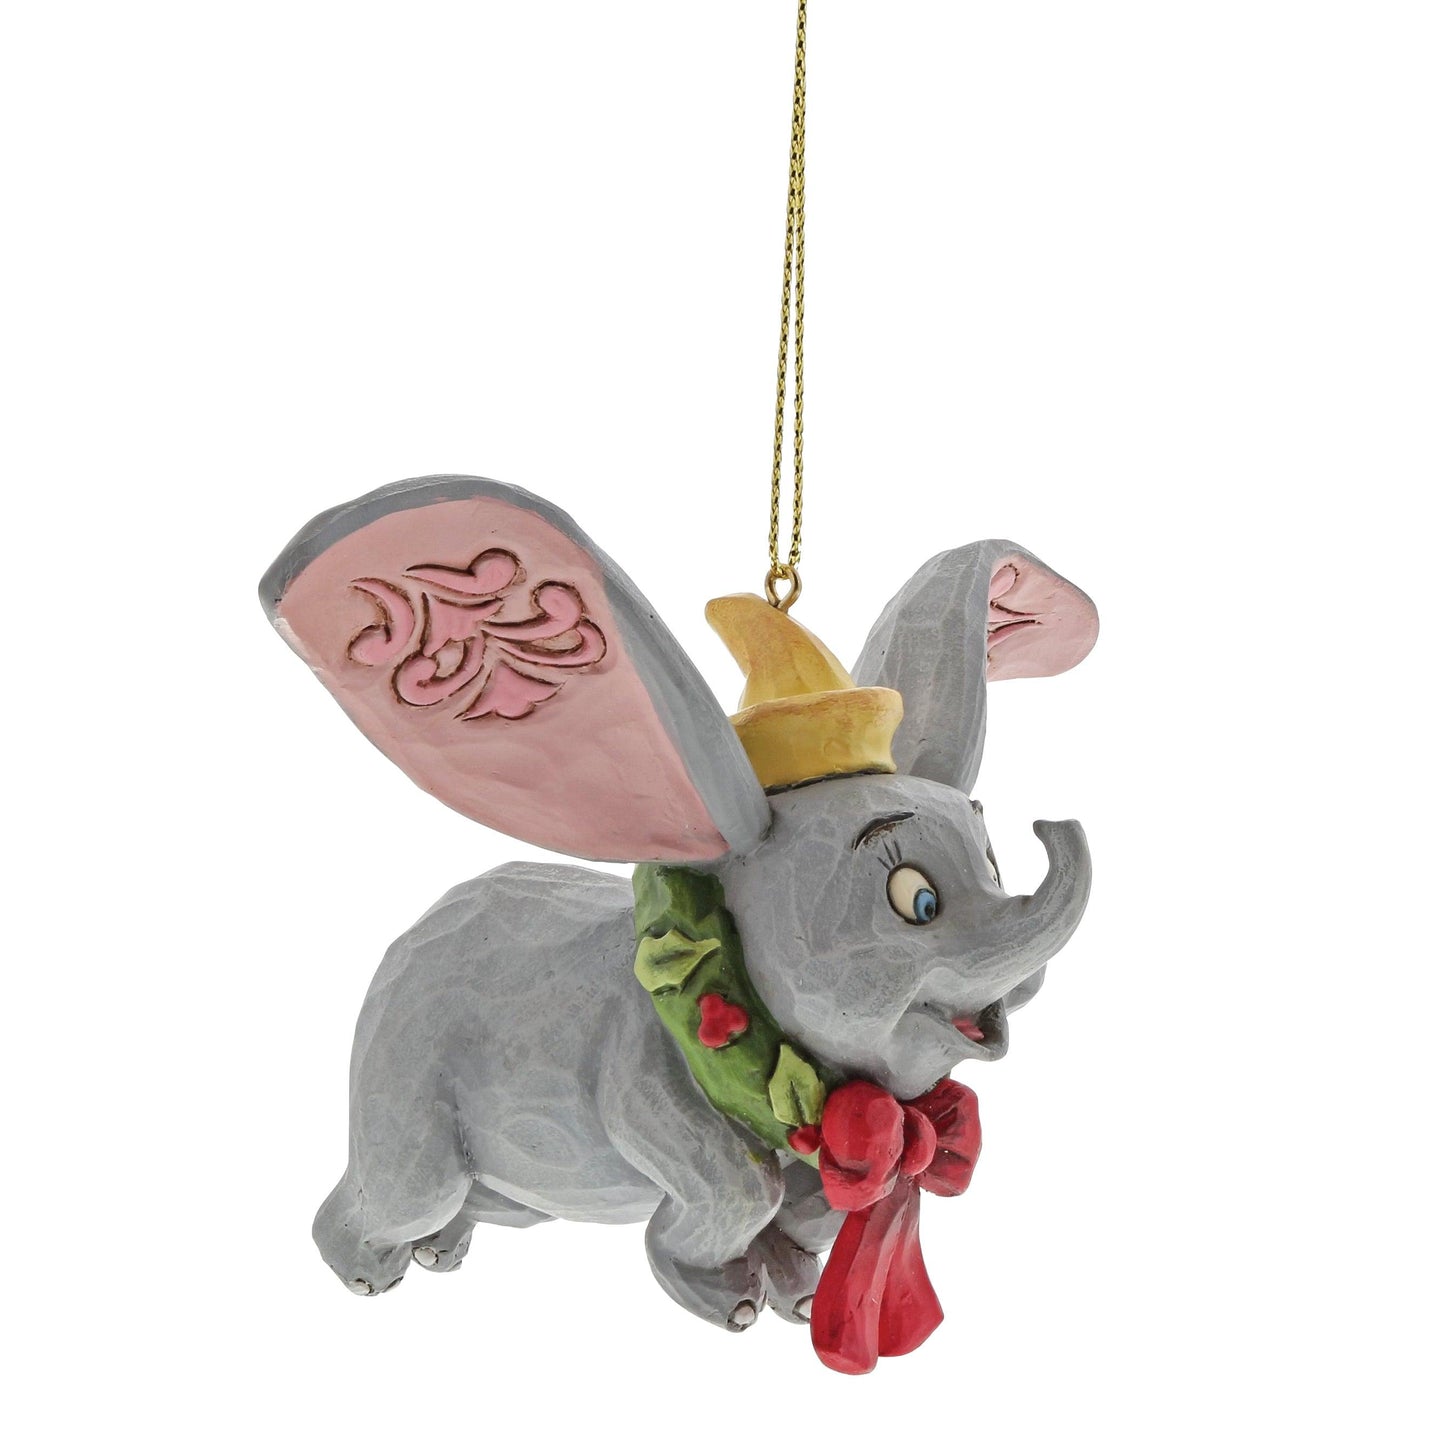 Dumbo Hanging Ornament (Disney Traditions by Jim Shore) - Gallery Gifts Online 